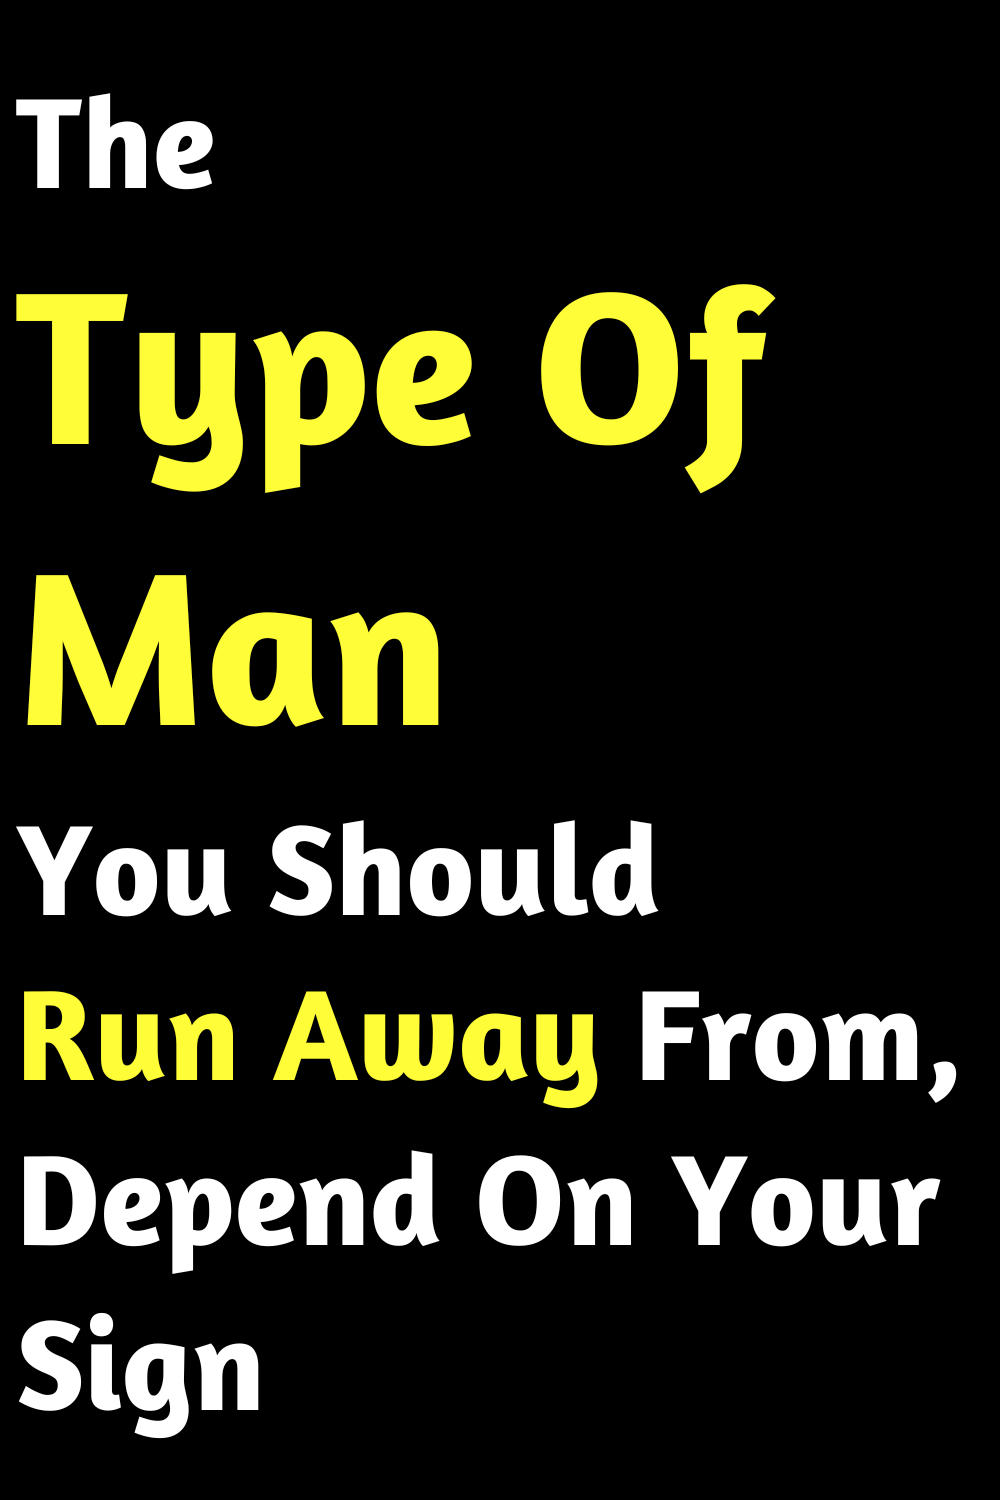 The Type Of Man You Should Run Away From, Depend On Your Sign